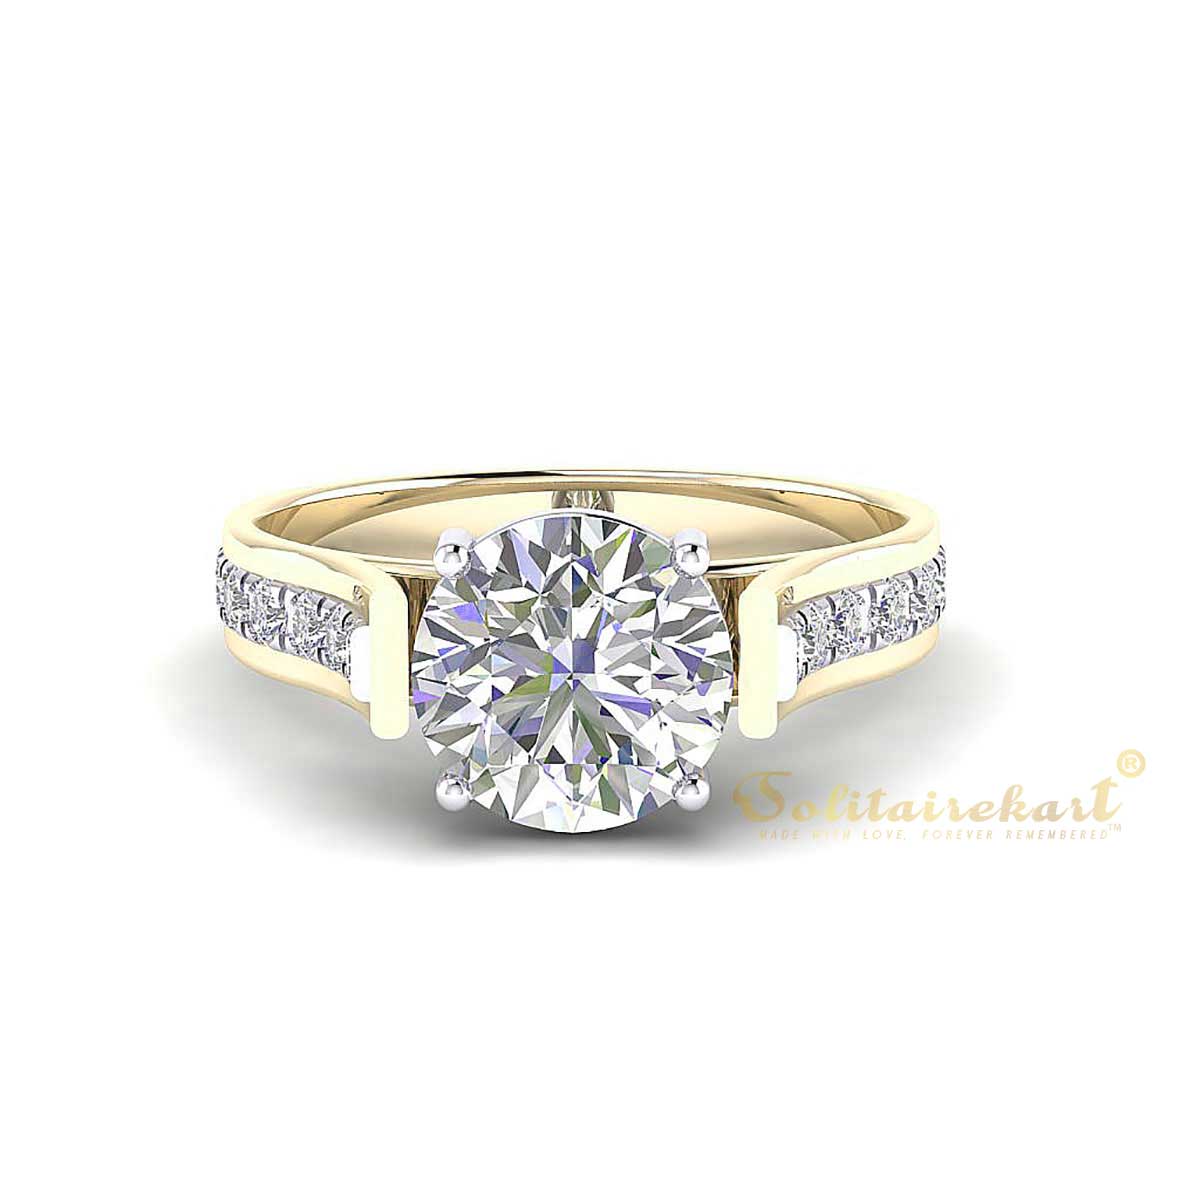 Special Engagement ring designs for female & male - Solitairekart